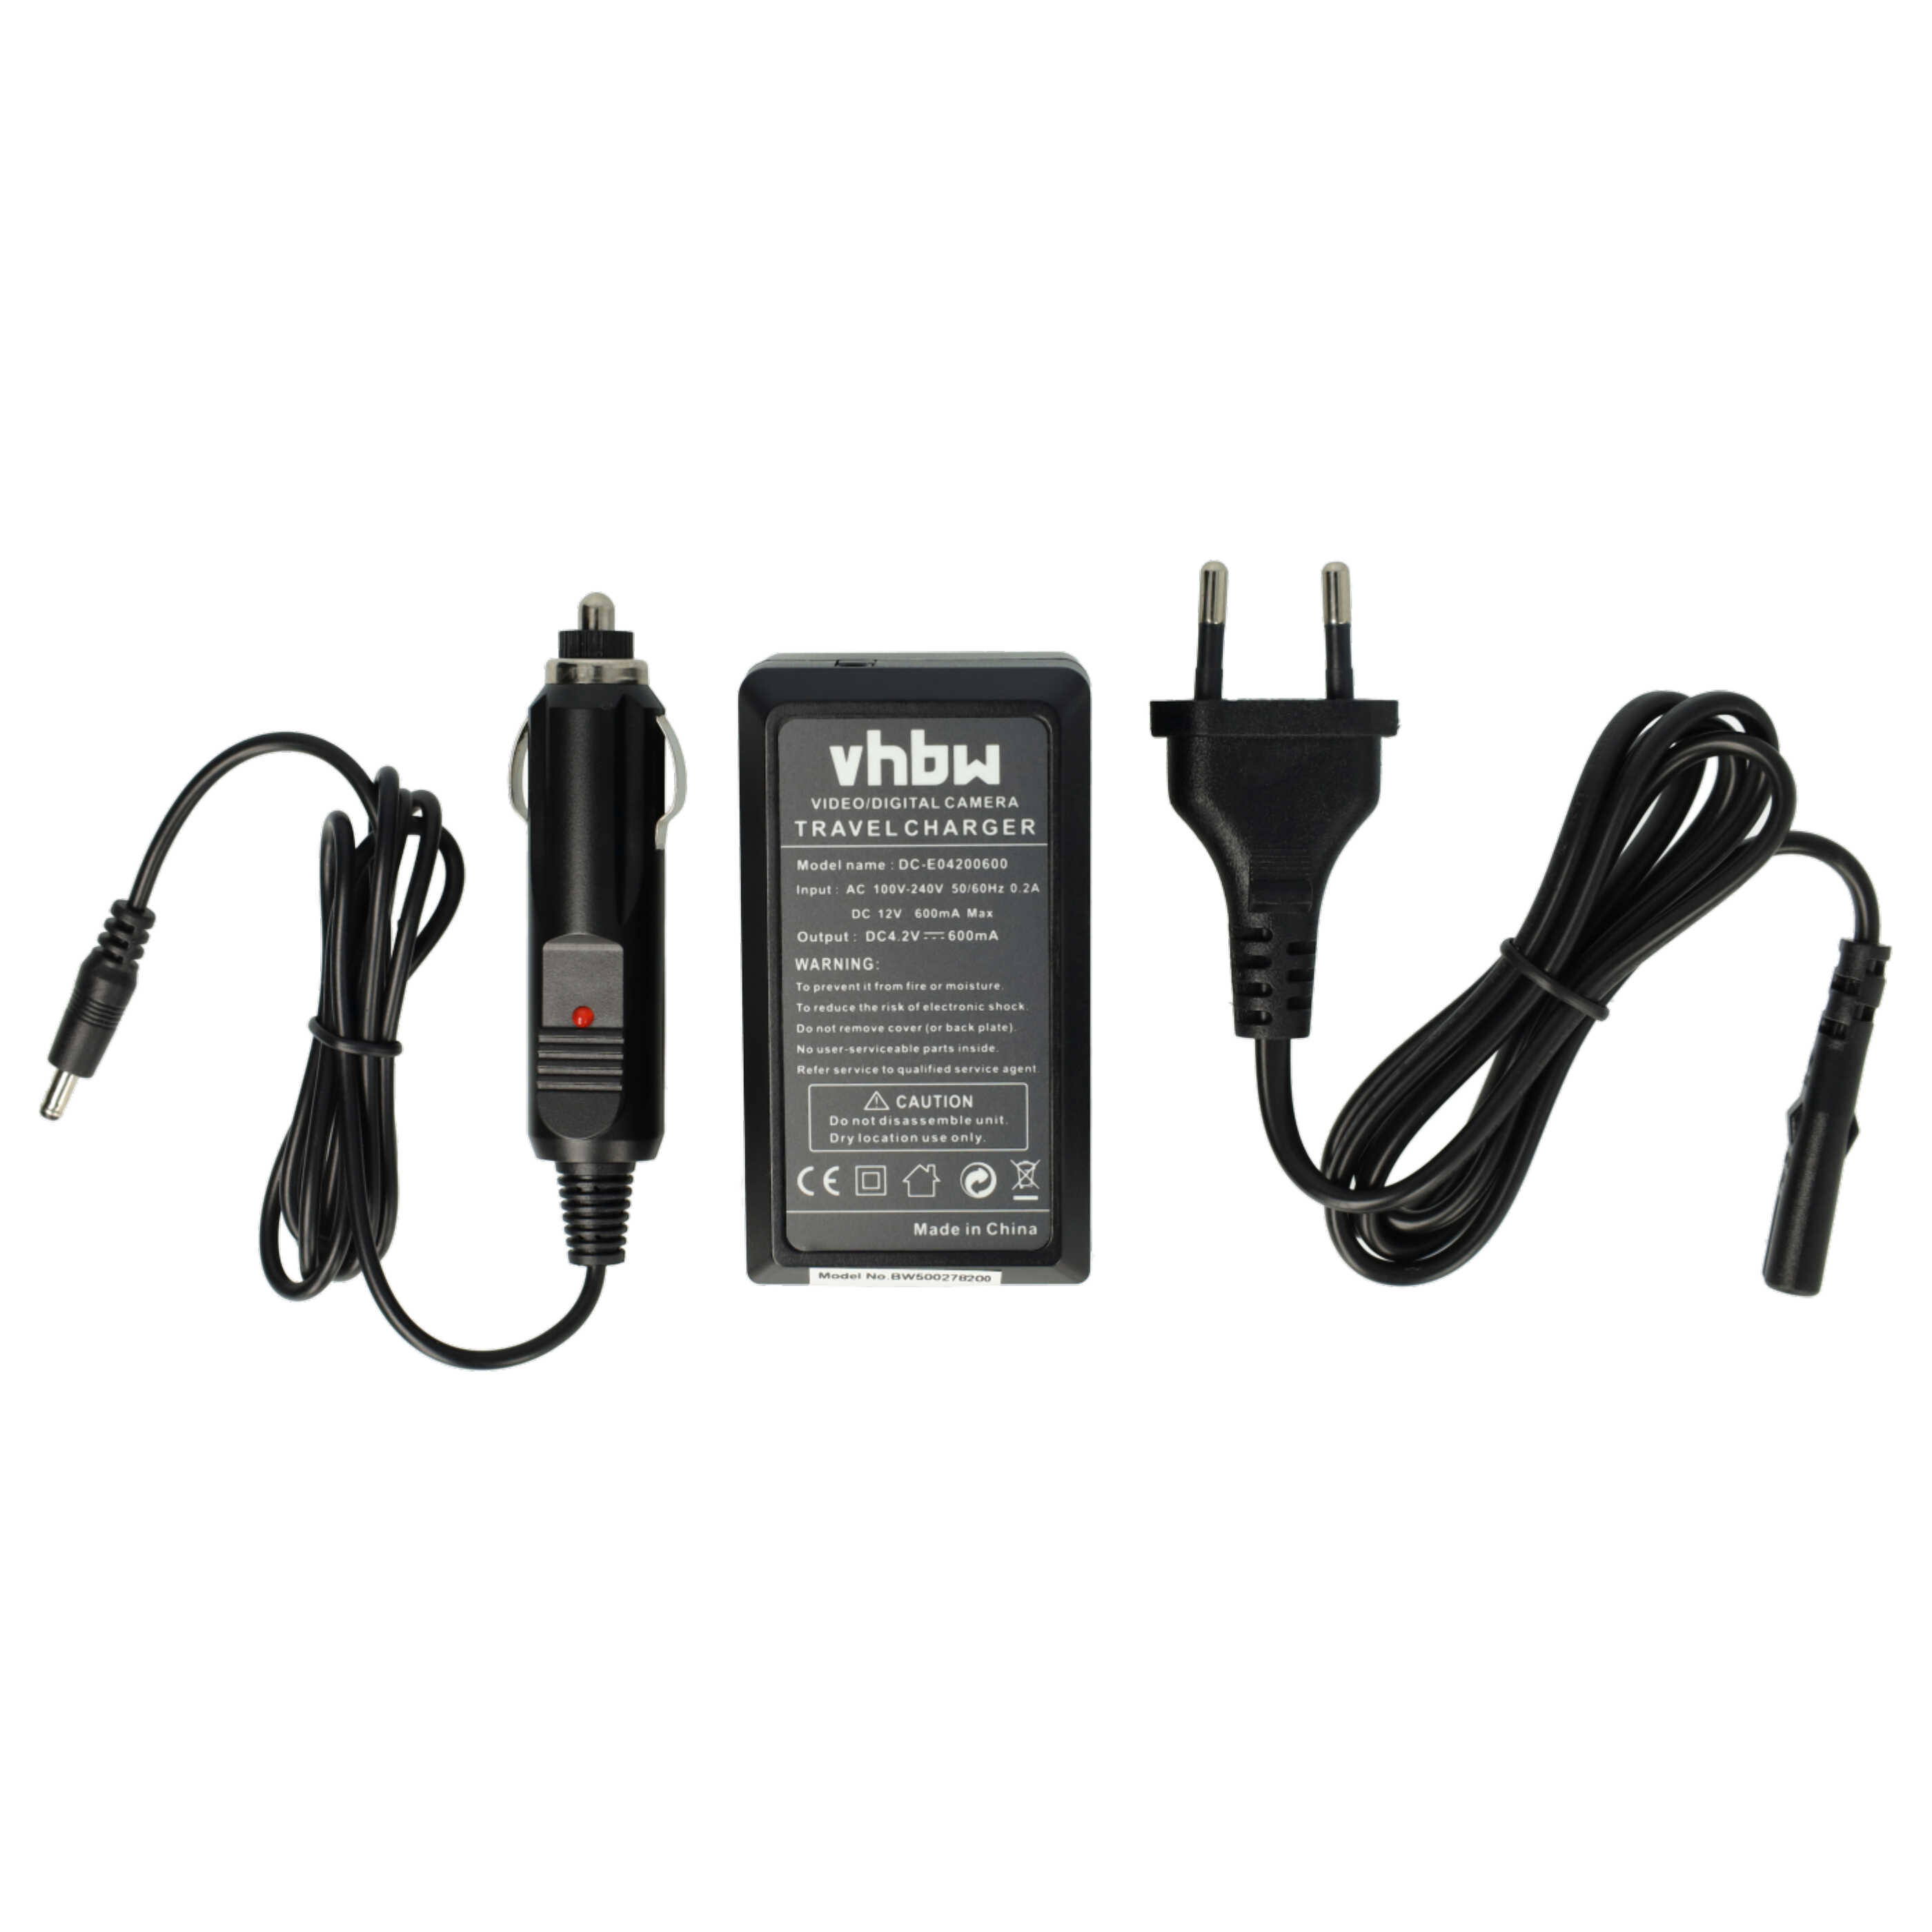 Battery Charger suitable for Exilim EX-G1 Camera etc. - 0.6 A, 4.2 V